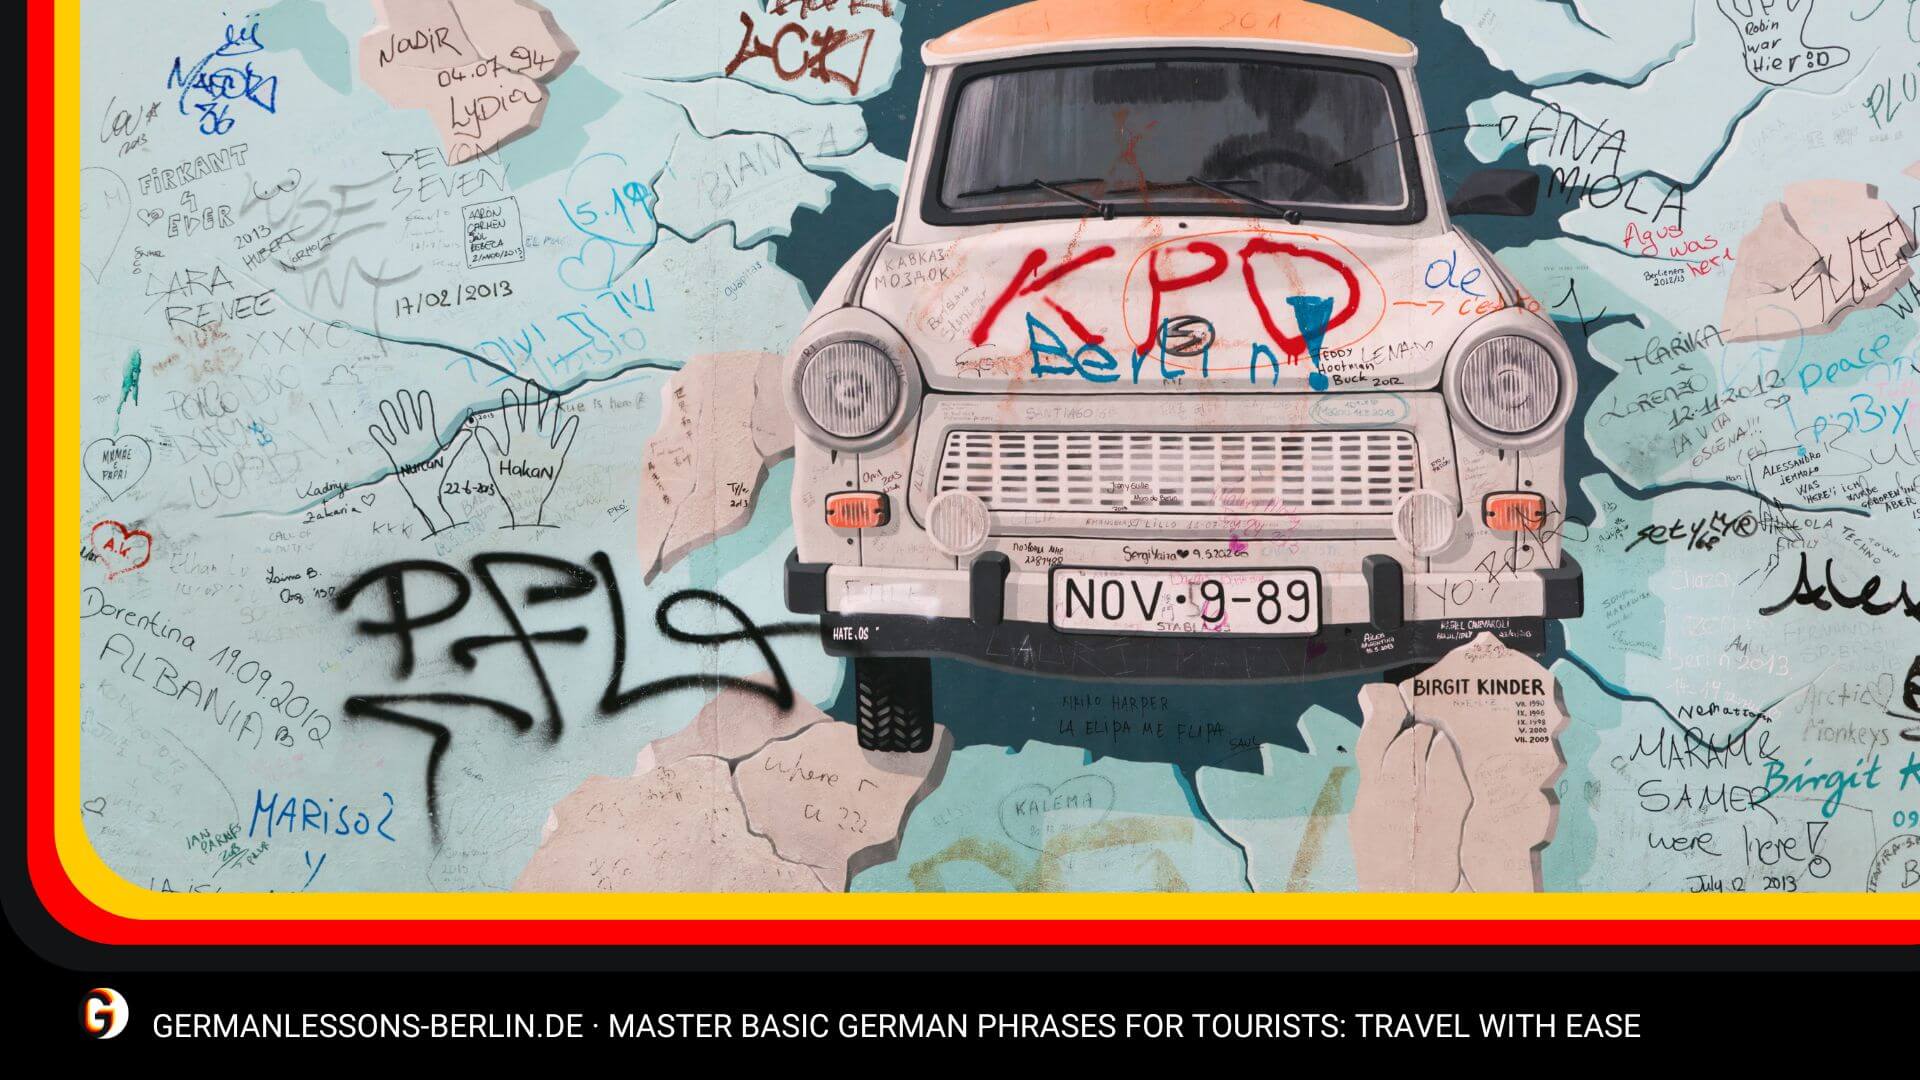 Master Basic German Phrases for Tourists: Travel with Ease